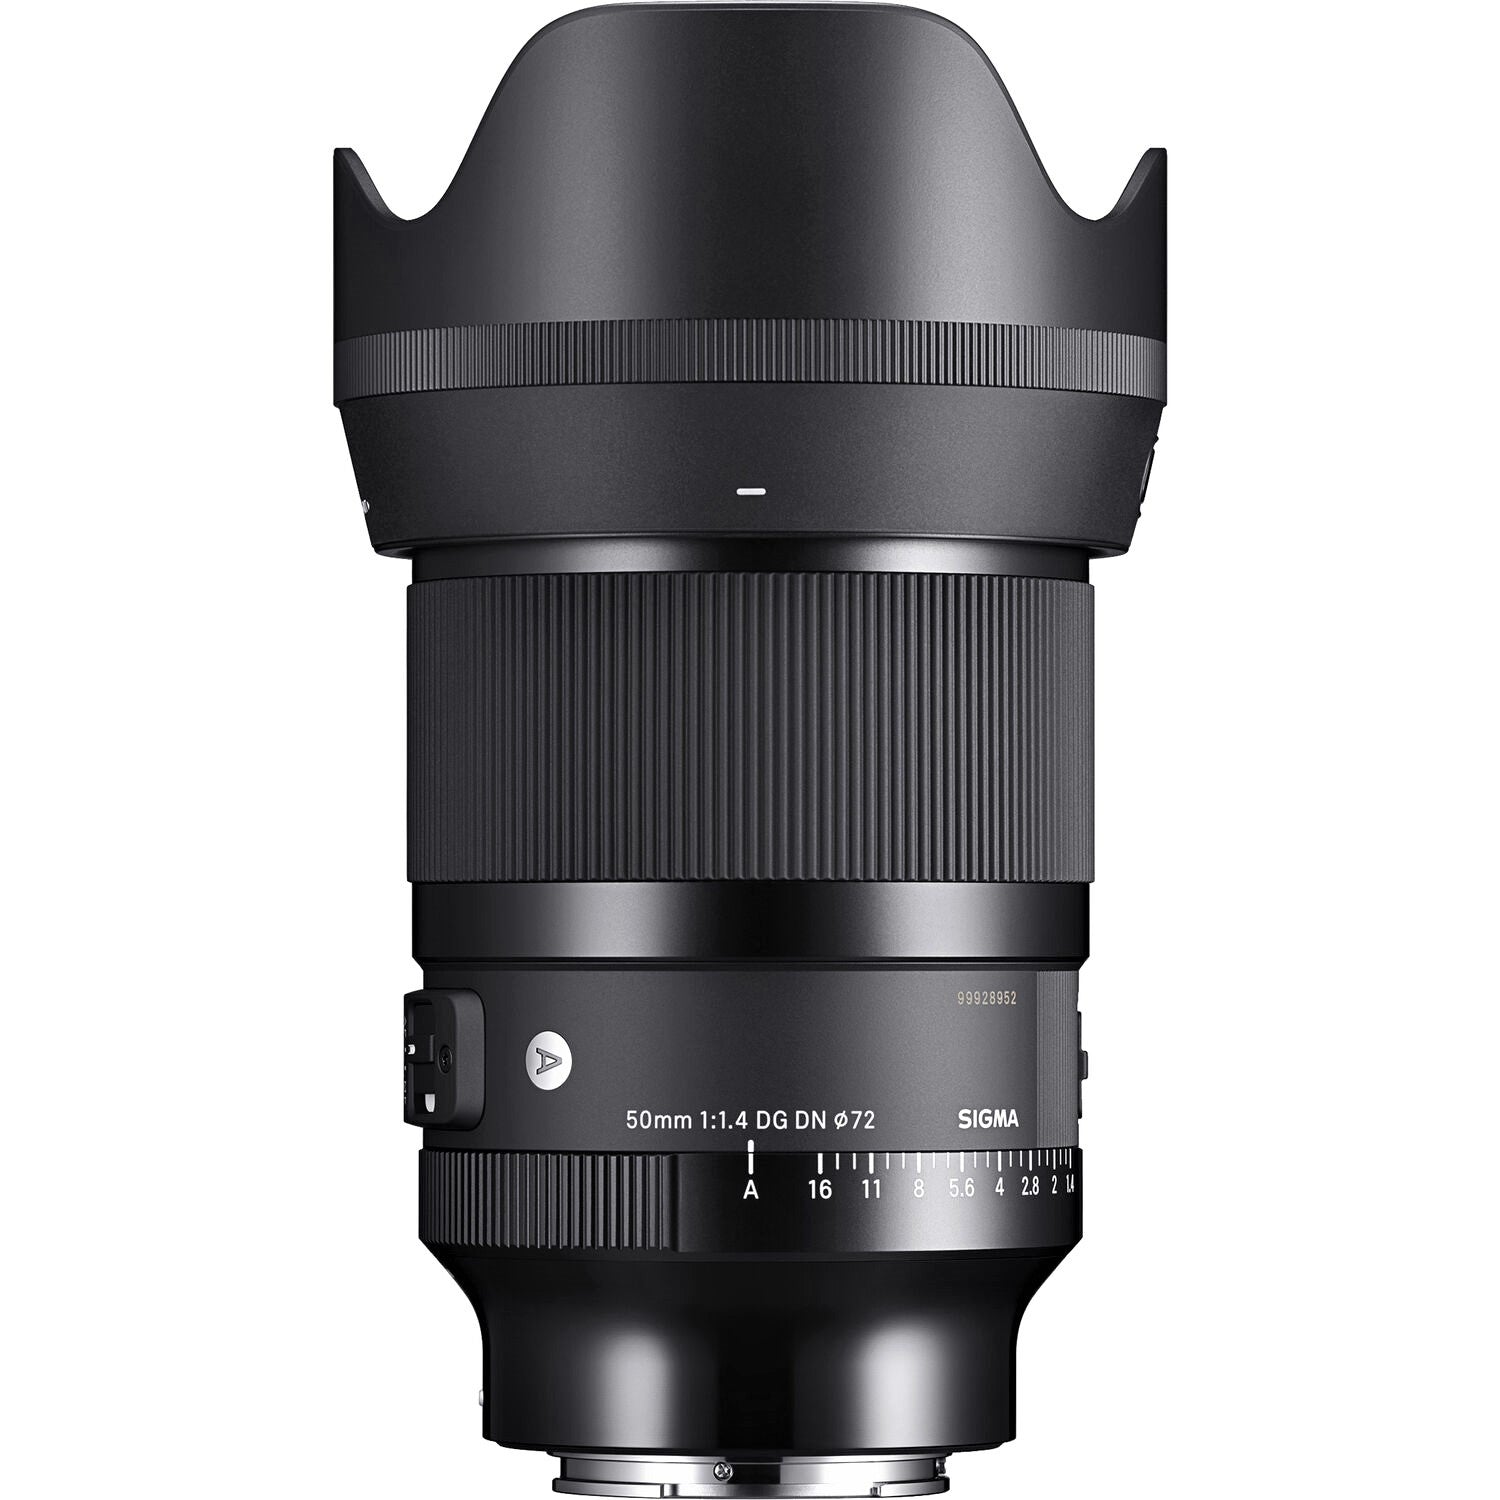 Sigma 50mm F1.4 DG DN Art Lens for Sony E with Attached Lens Hood on the Top